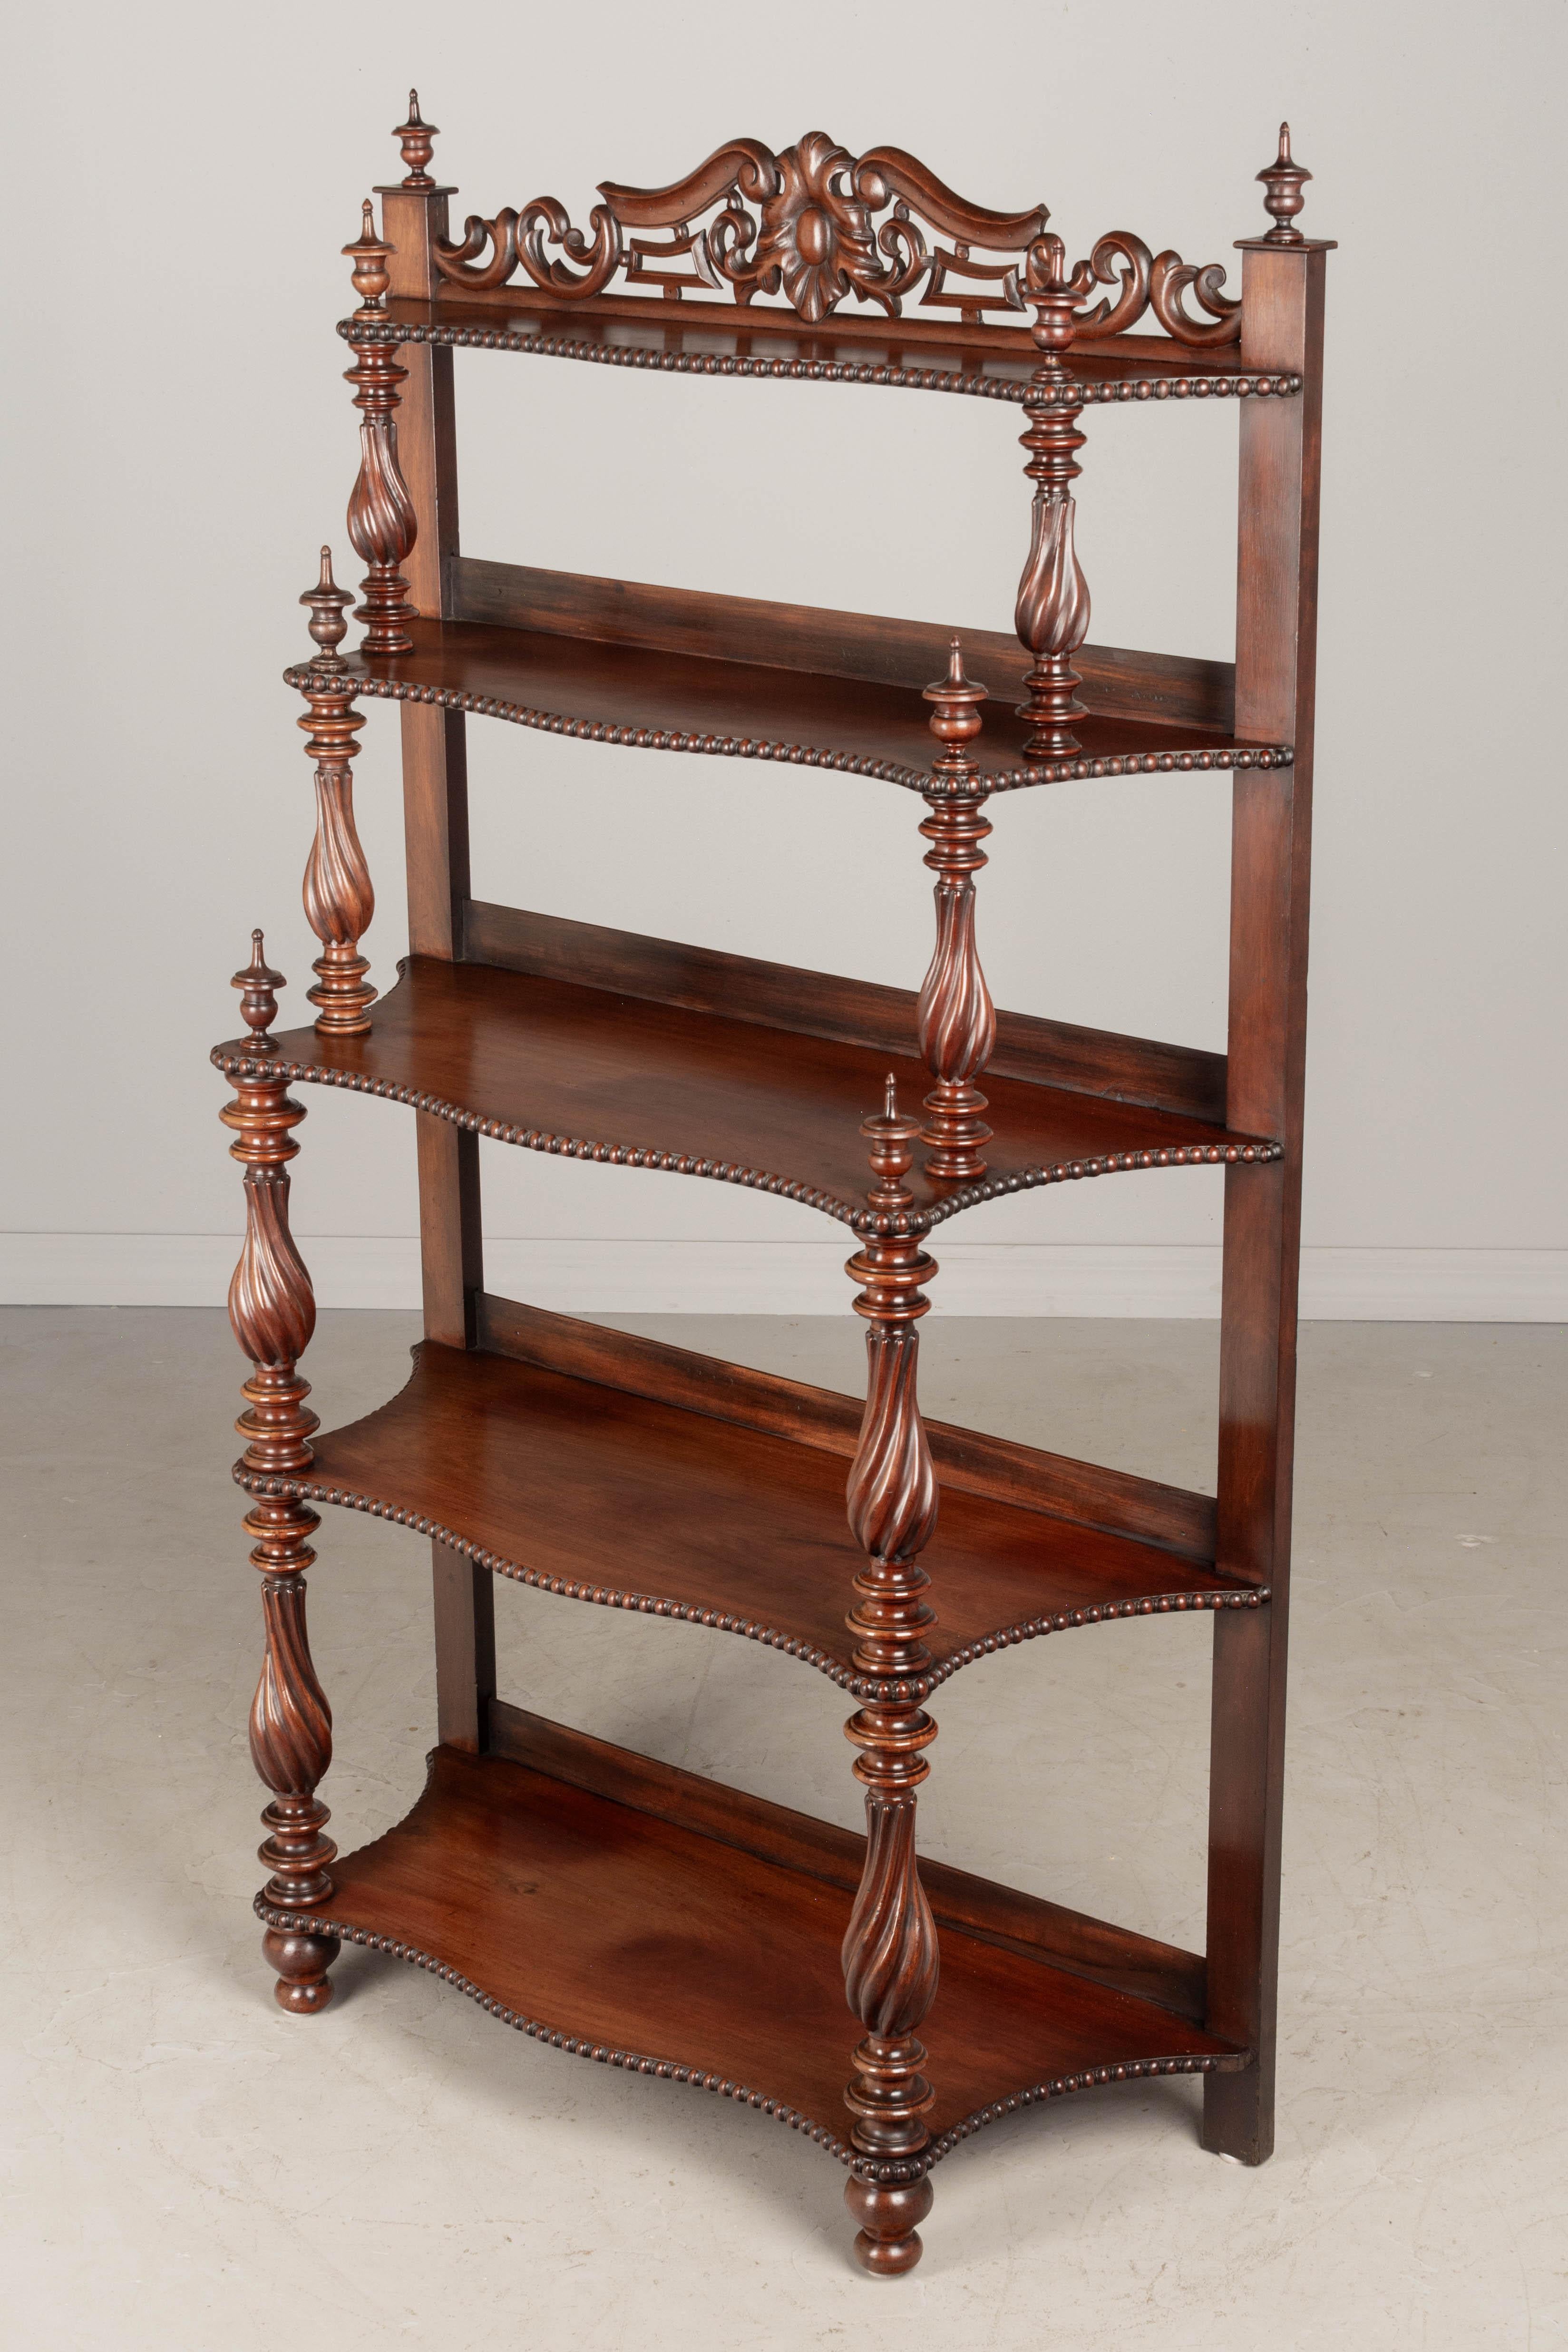 Hand-Crafted 19th Century French Louis Philippe Étagère or Tiered Shelf For Sale